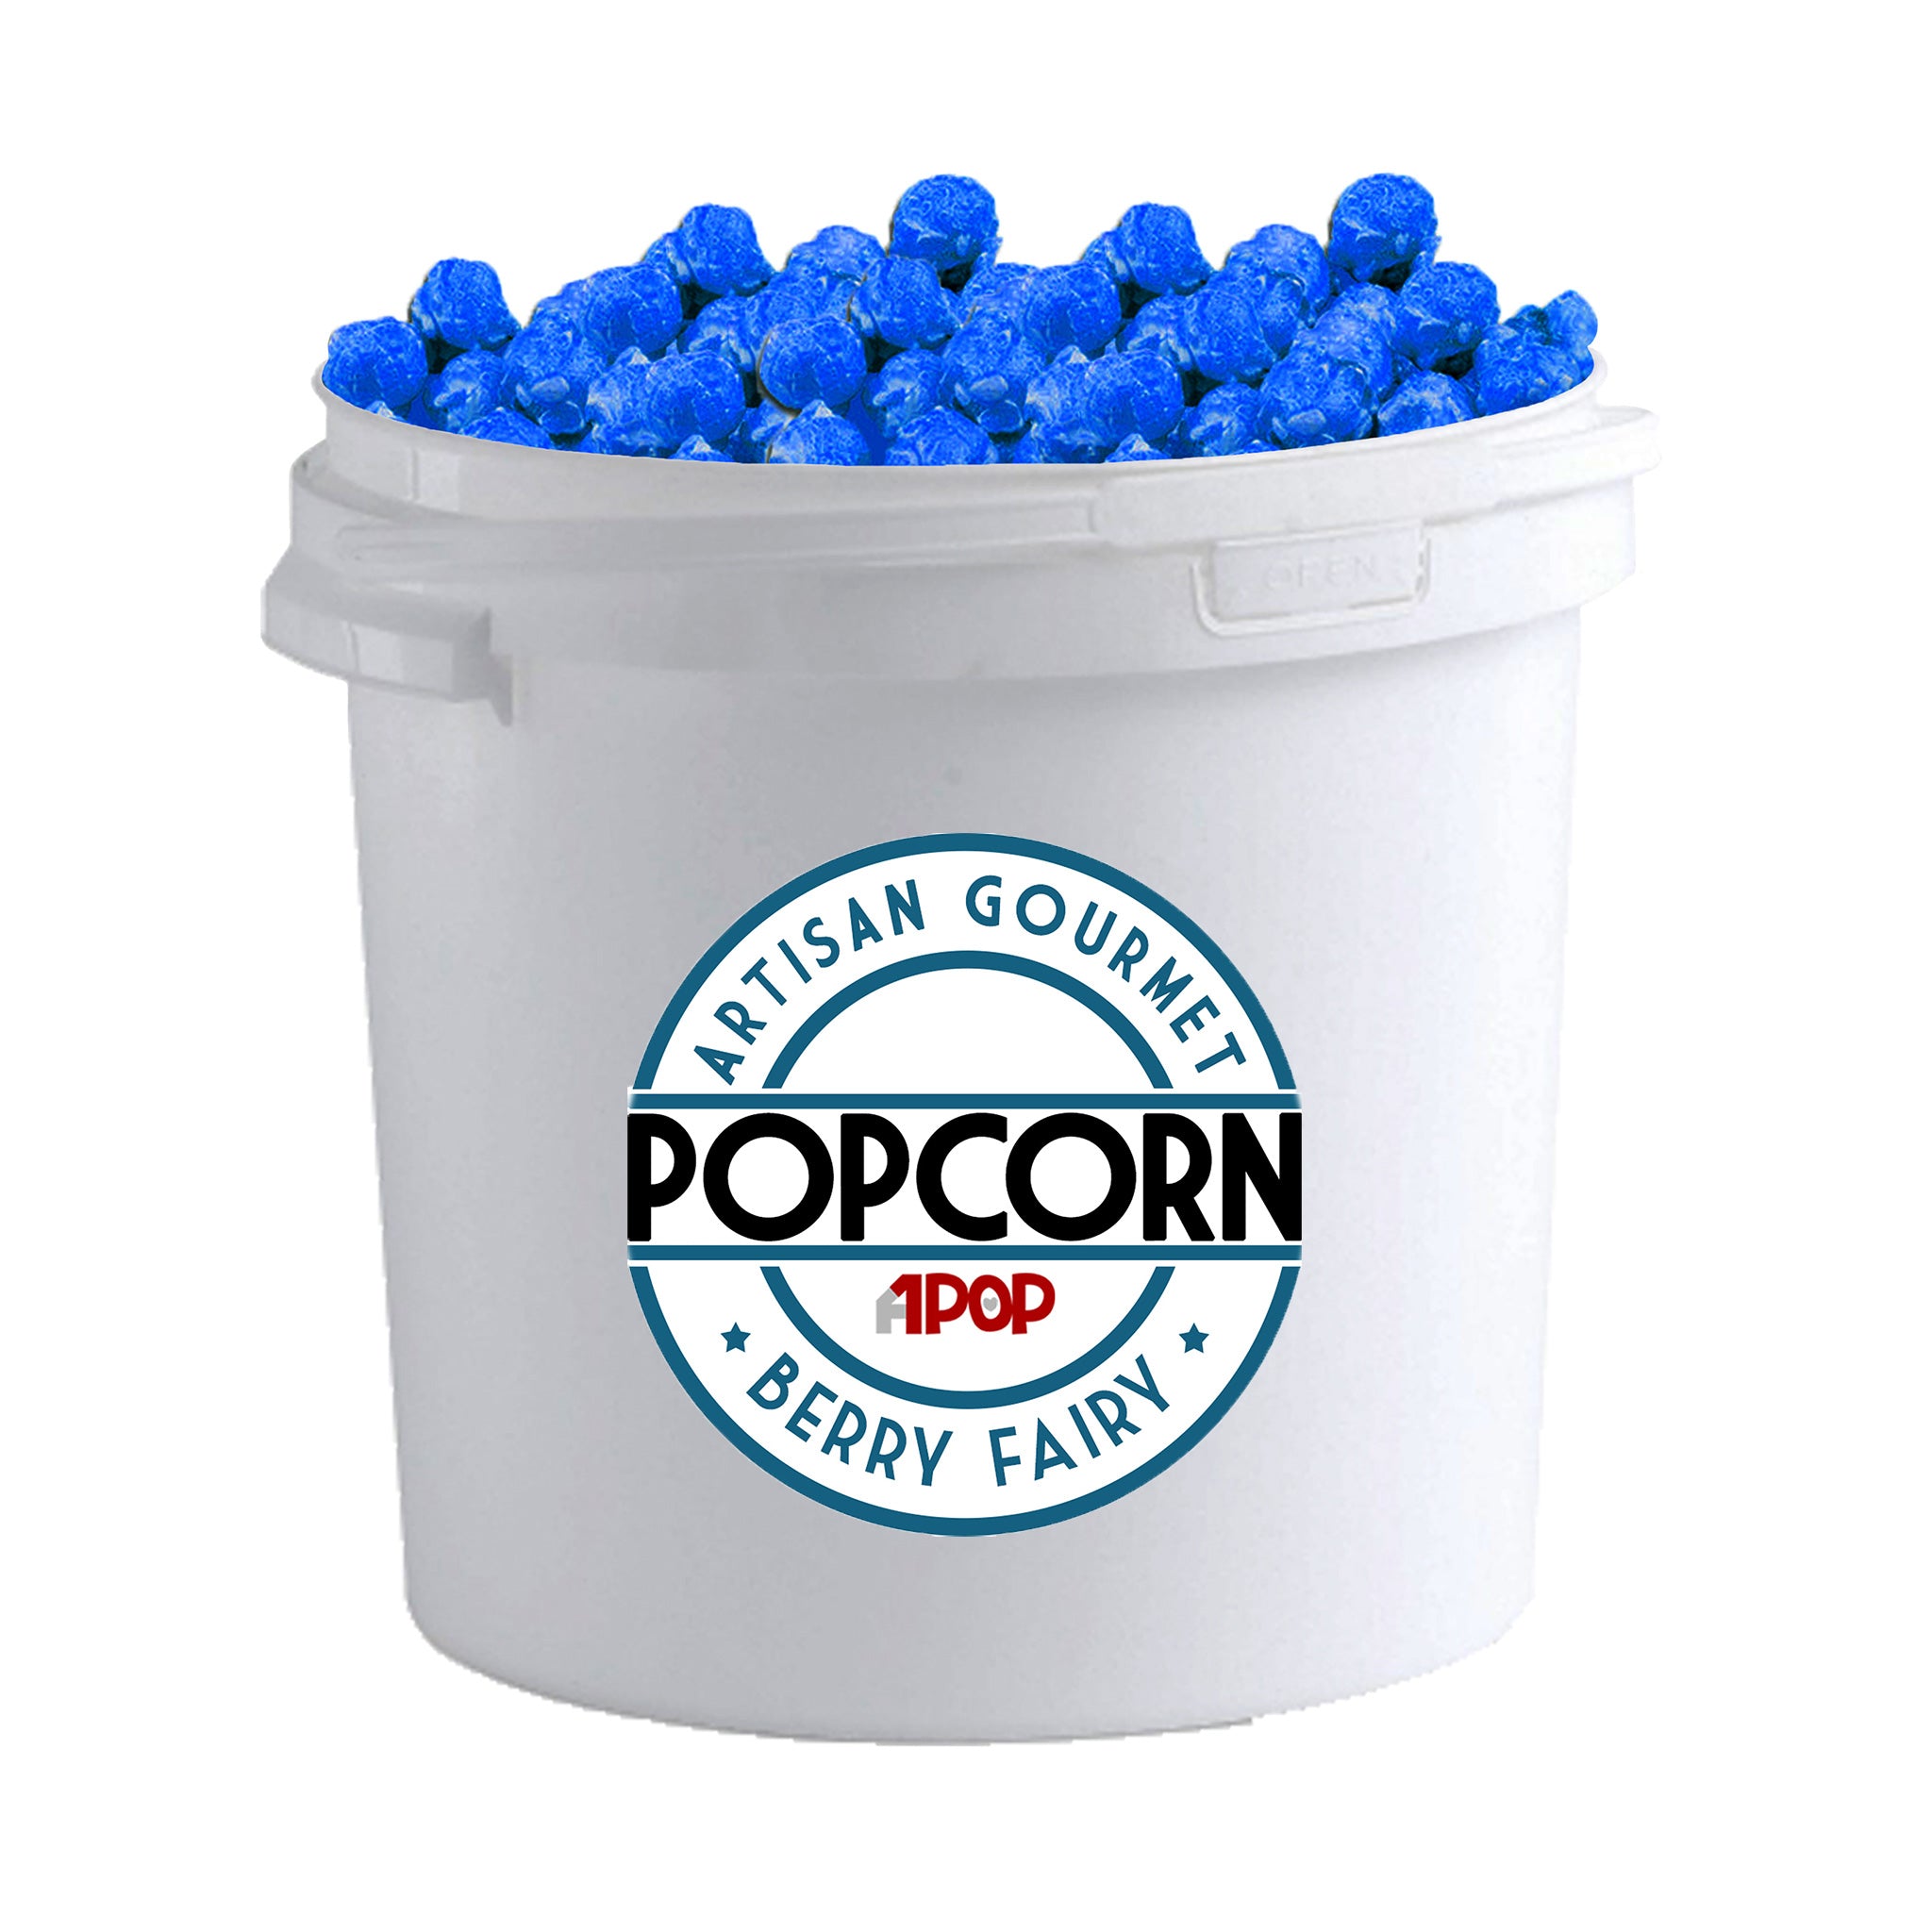 Ready Made Gourmet Popcorn - All Flavours 1.2kg